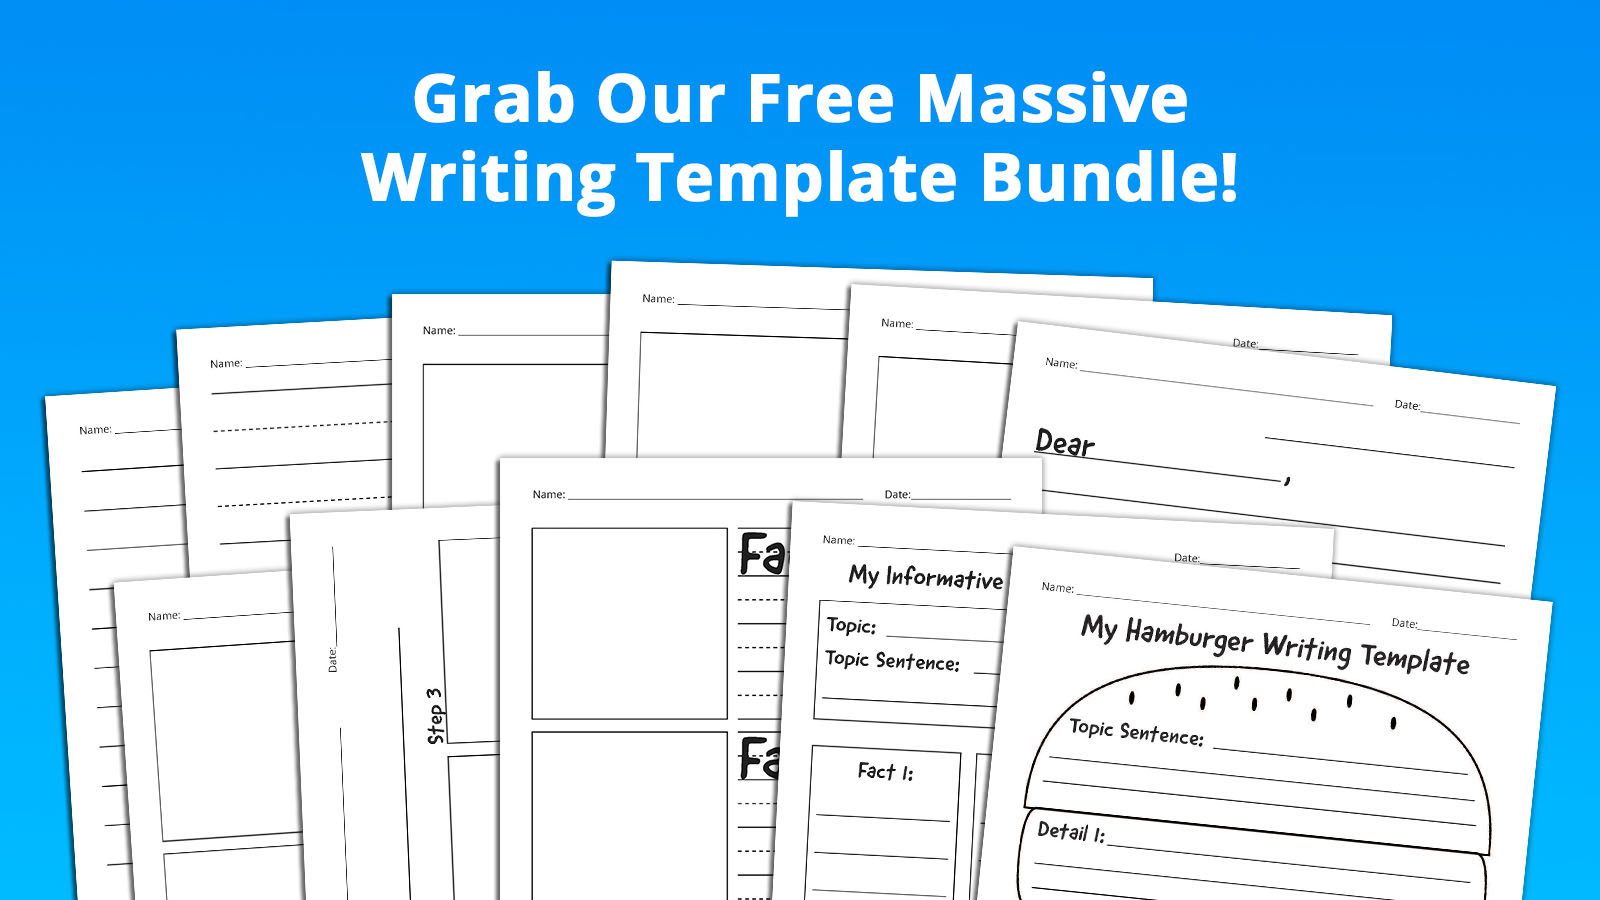 FREE Lined Paper Printable  Many Templates are Available